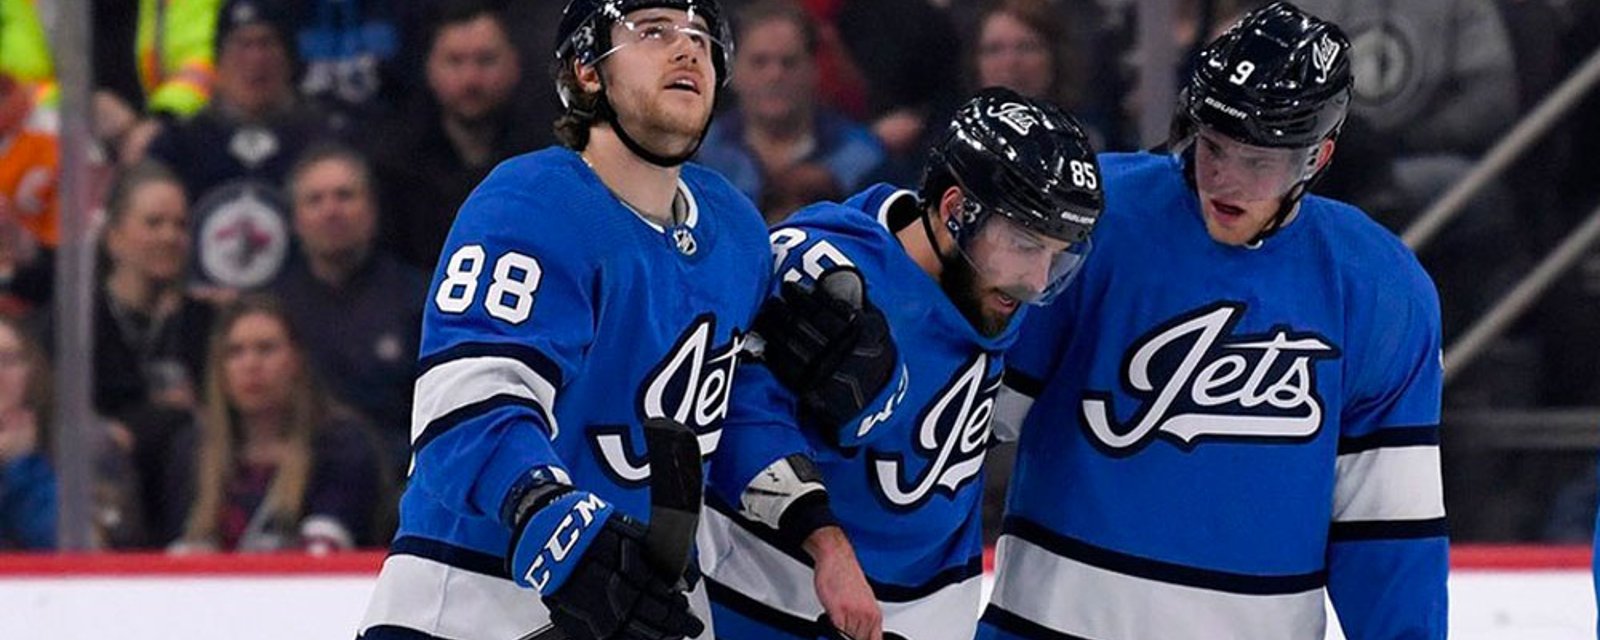 Perreault rips NHL Player Safety, threatens Virtanen with revenge